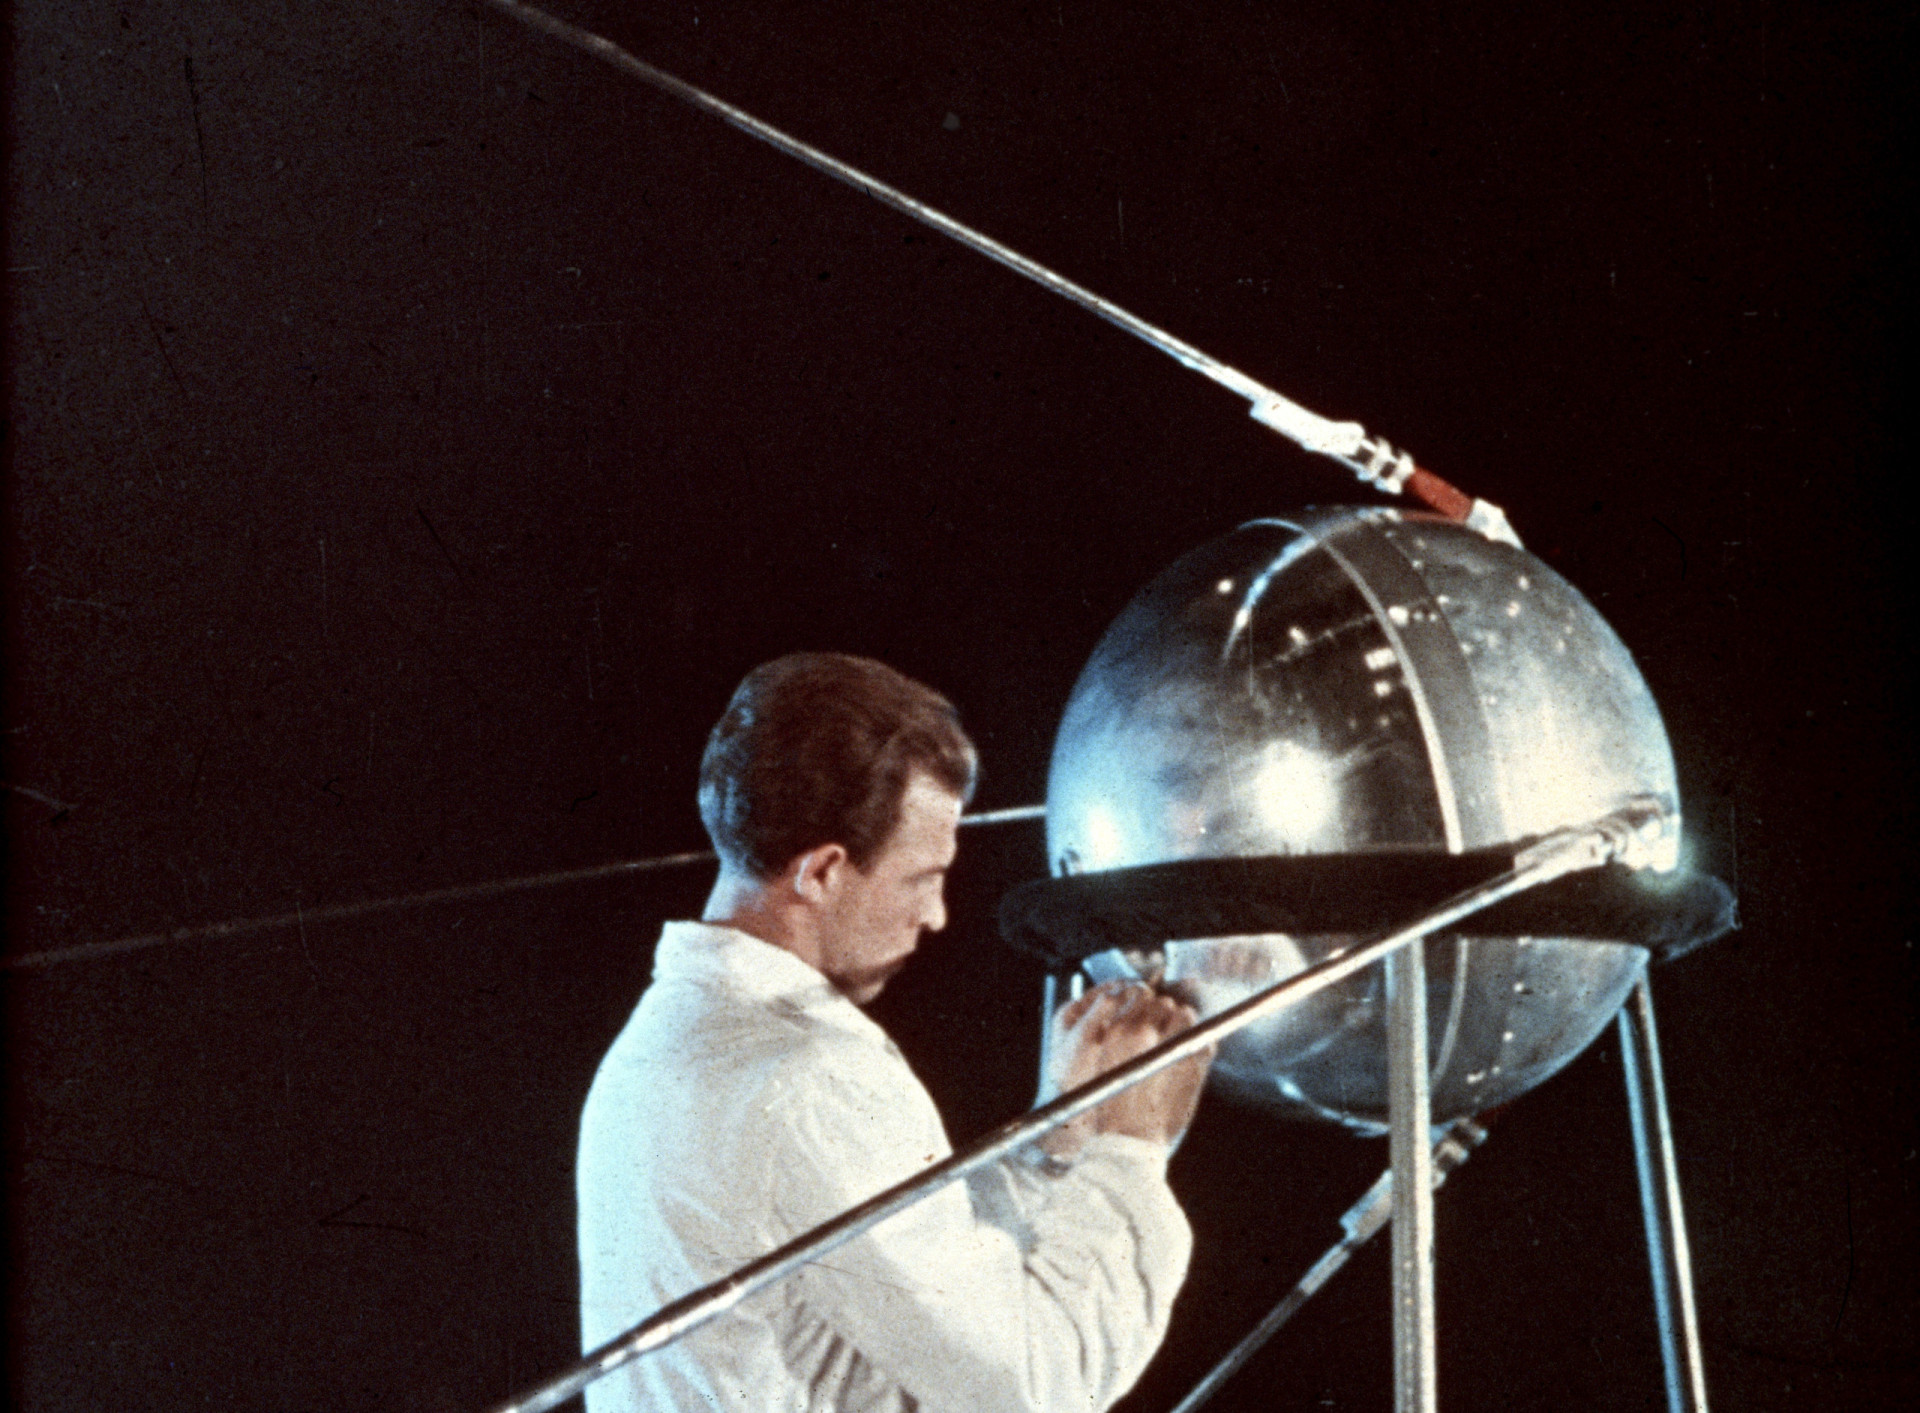 <p>Sputnik 1 was the first ever artificial Earth satellite in orbit. Launched by the Soviet Union in 1957, it made America nervous.</p><p>You may also like:<a href="https://www.starsinsider.com/n/459039?utm_source=msn.com&utm_medium=display&utm_campaign=referral_description&utm_content=713901en-ph"> The most iconic tattoos in sports history</a></p>